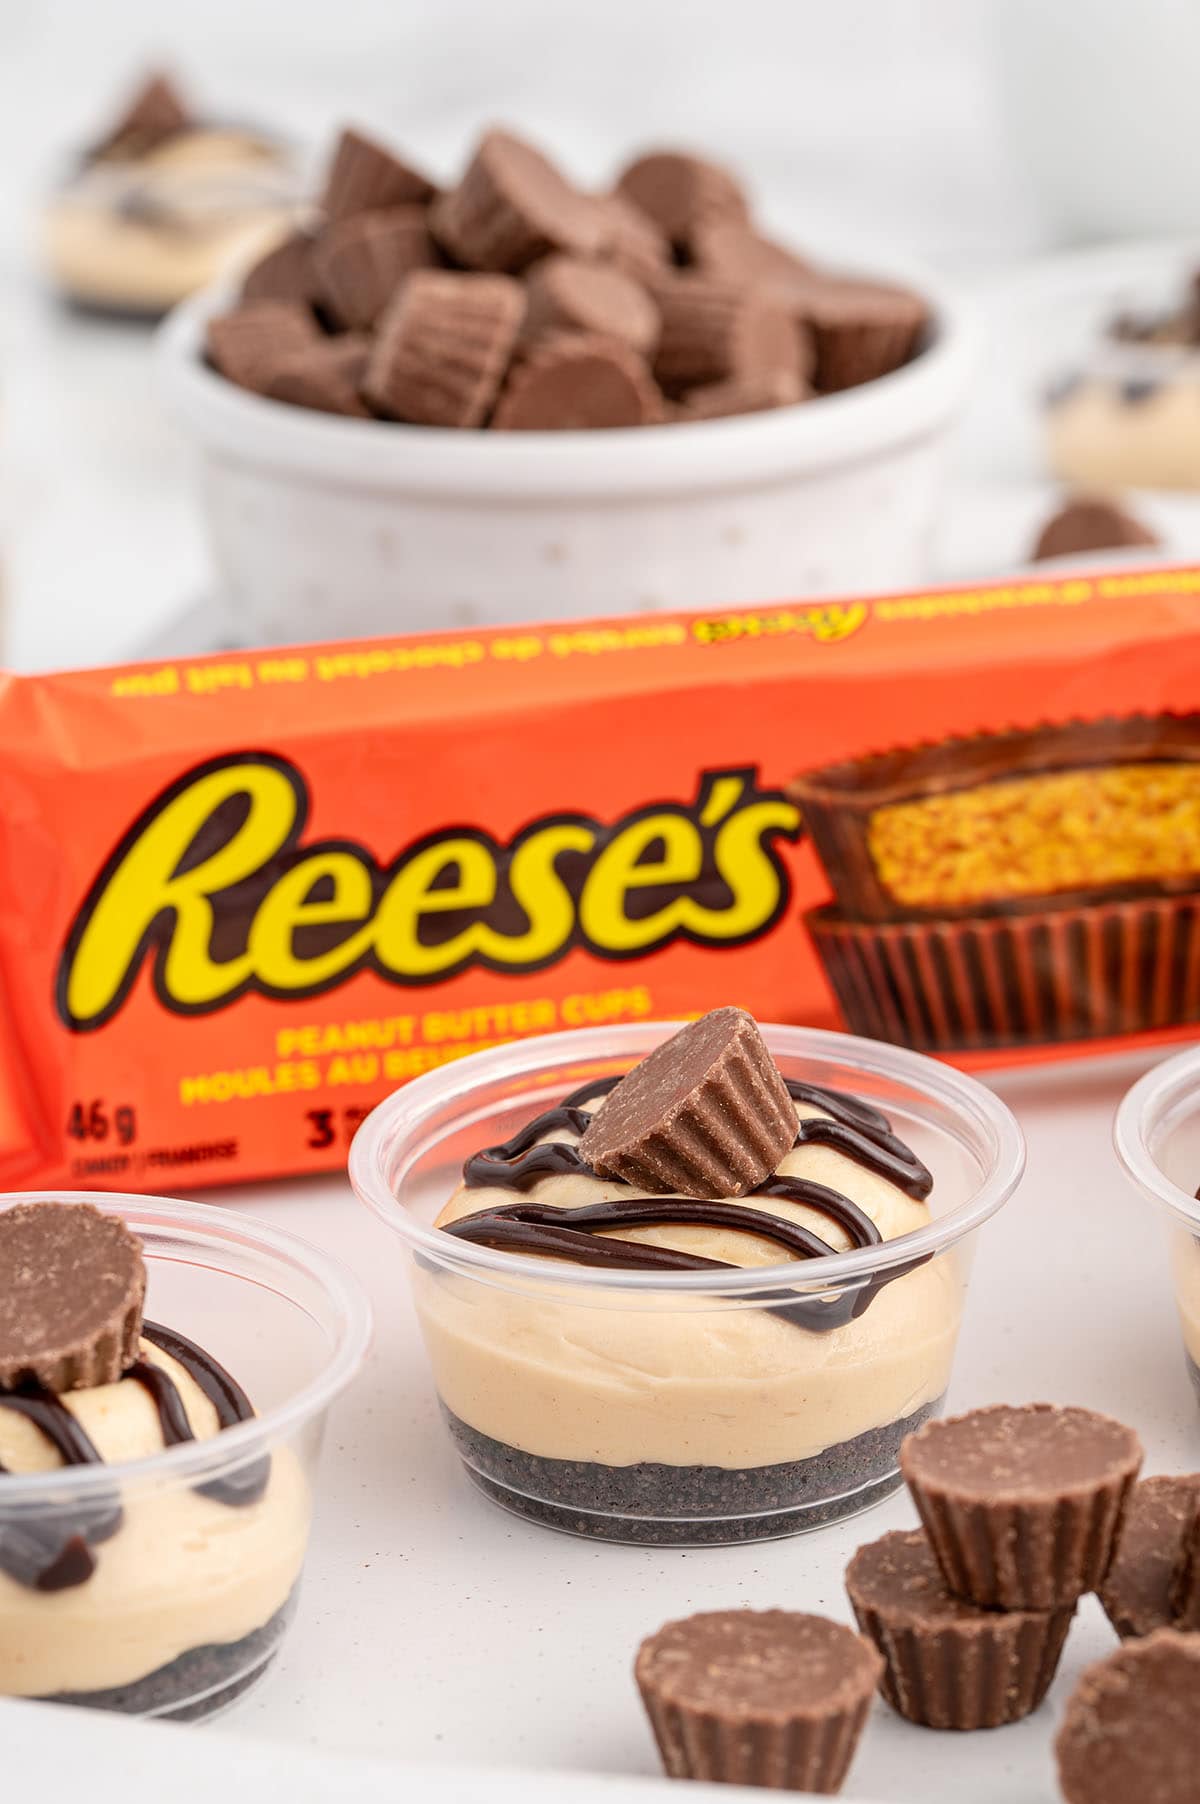 a couple of Chocolate Peanut Butter Dessert Cups with Reese’s peanut butter cups package on the background.